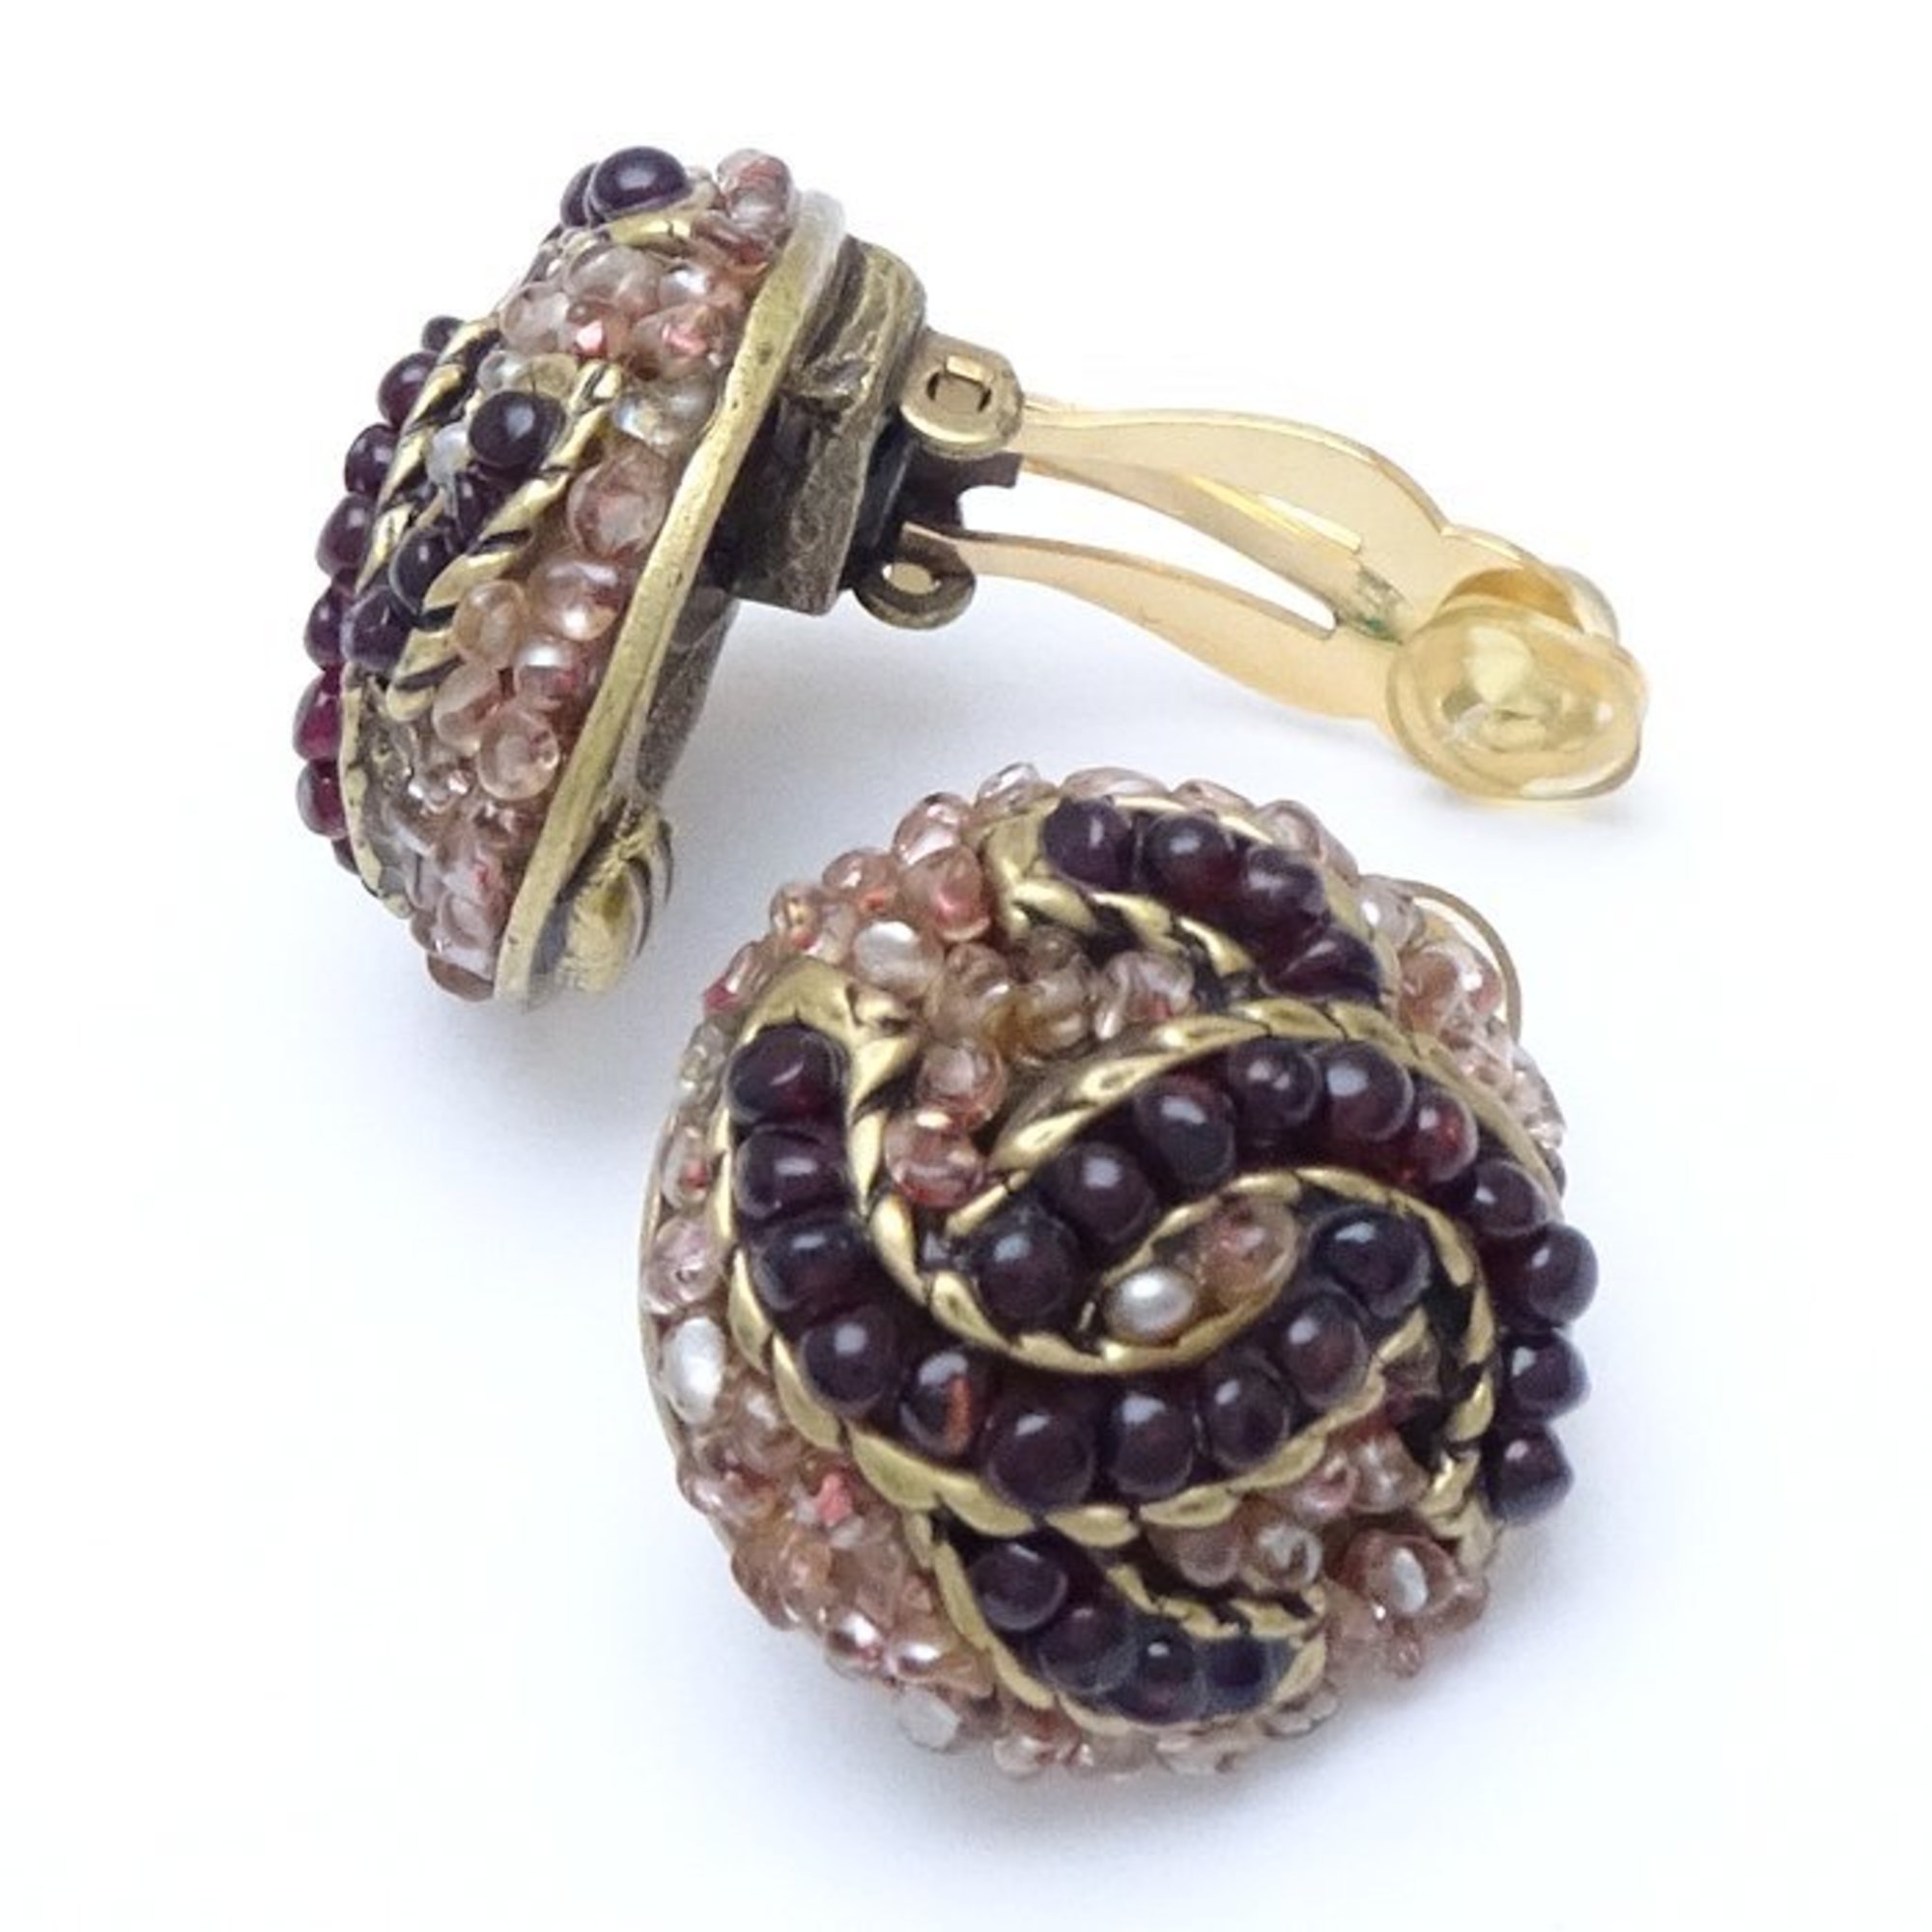 CHANEL Cocomark earrings 00A beads GP gold plated 290953